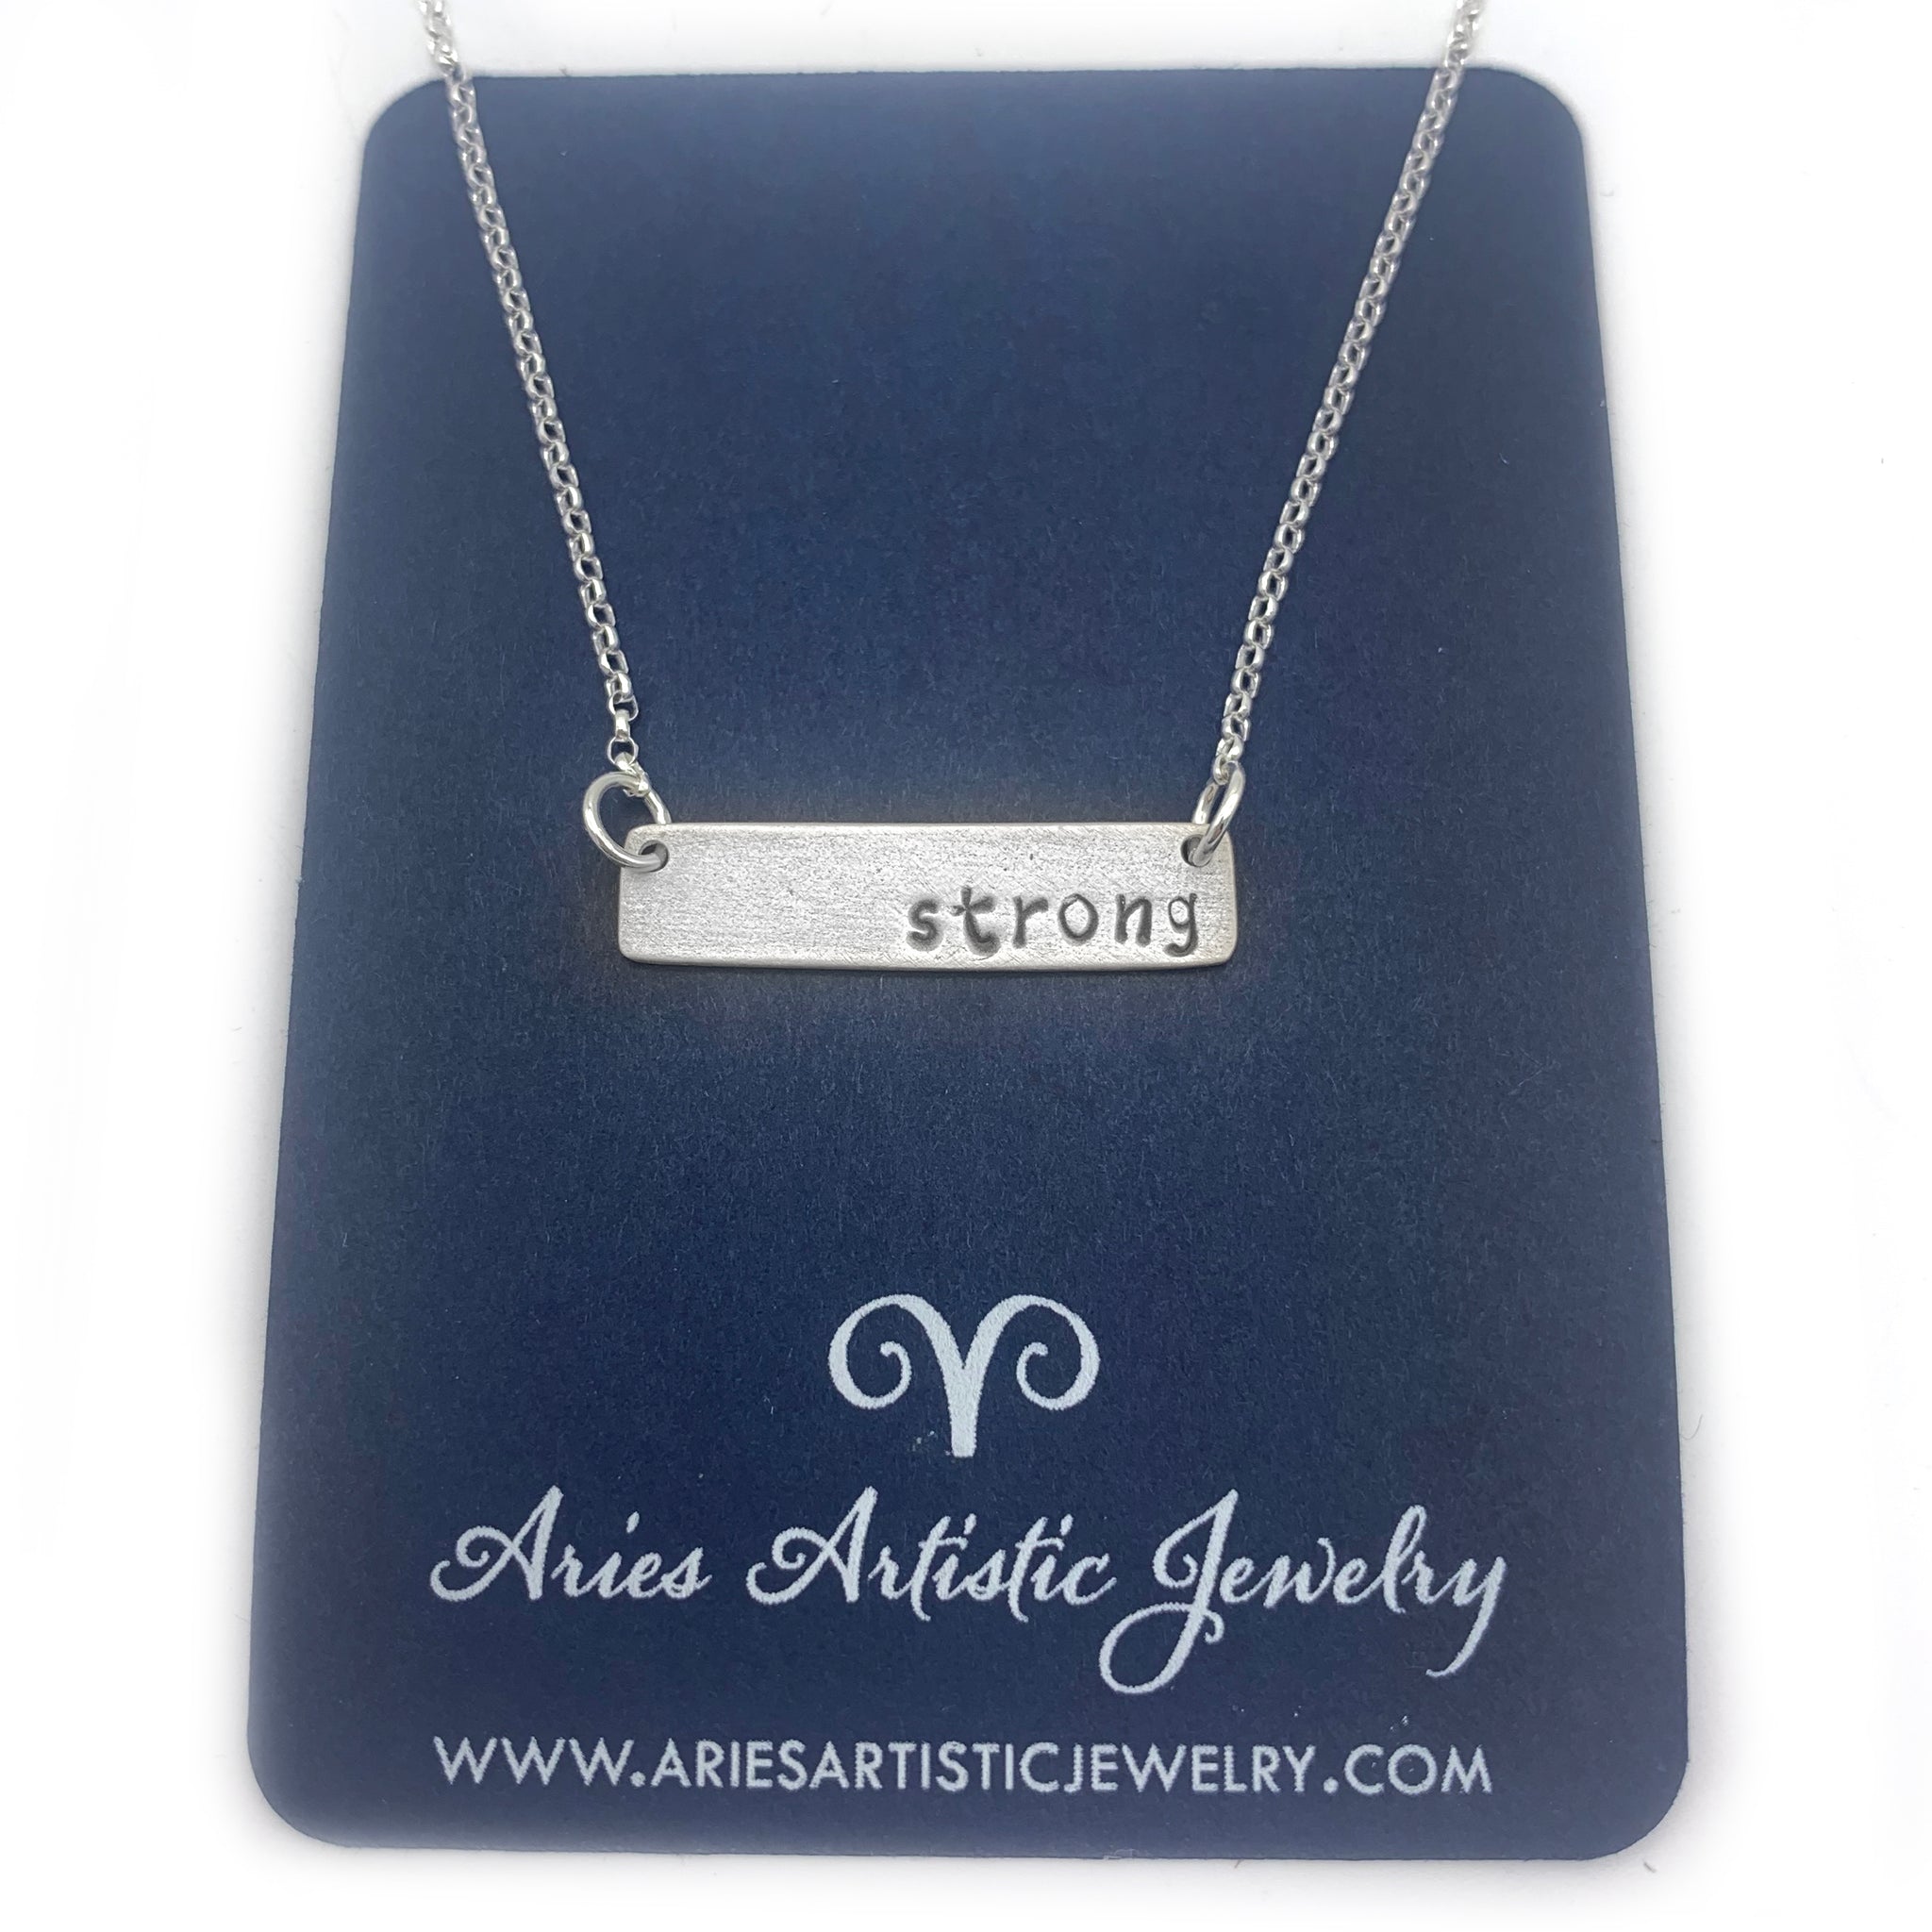 Strong Word bar necklace sterling silver jewelry by NJ artist